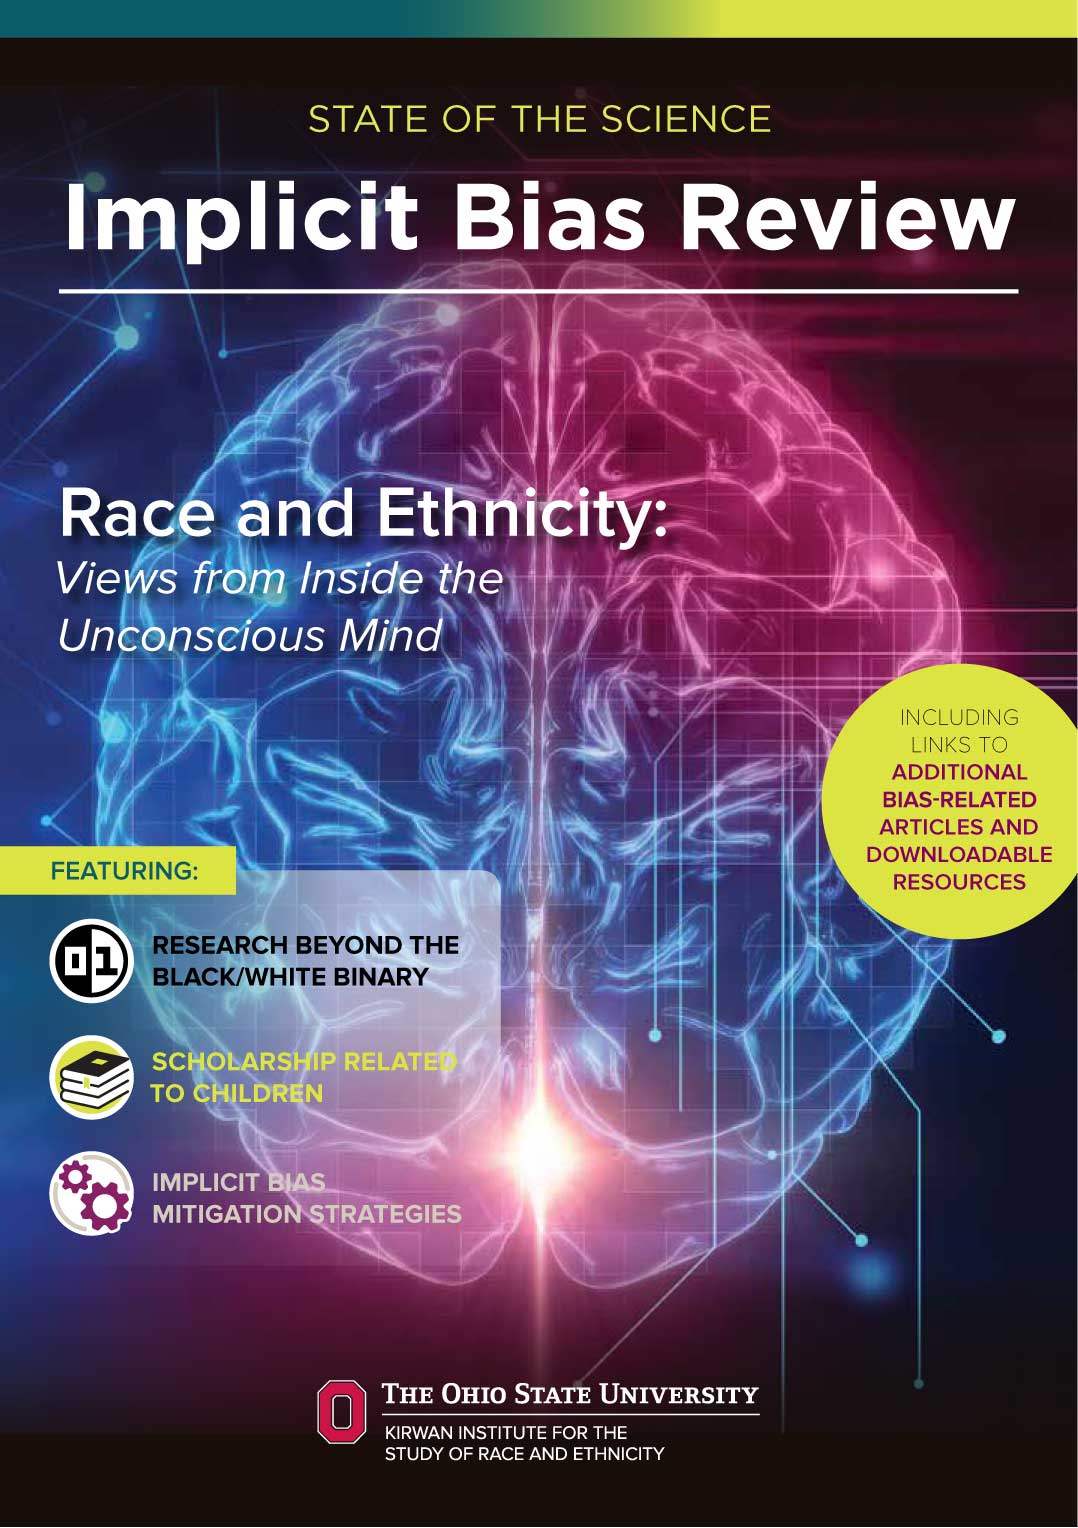 The cover image of the 2017 edition of State of the Science: Implicit Bias Review by the Kirwan Institute for the Study of Race and Ethnicity at the Ohio State University.